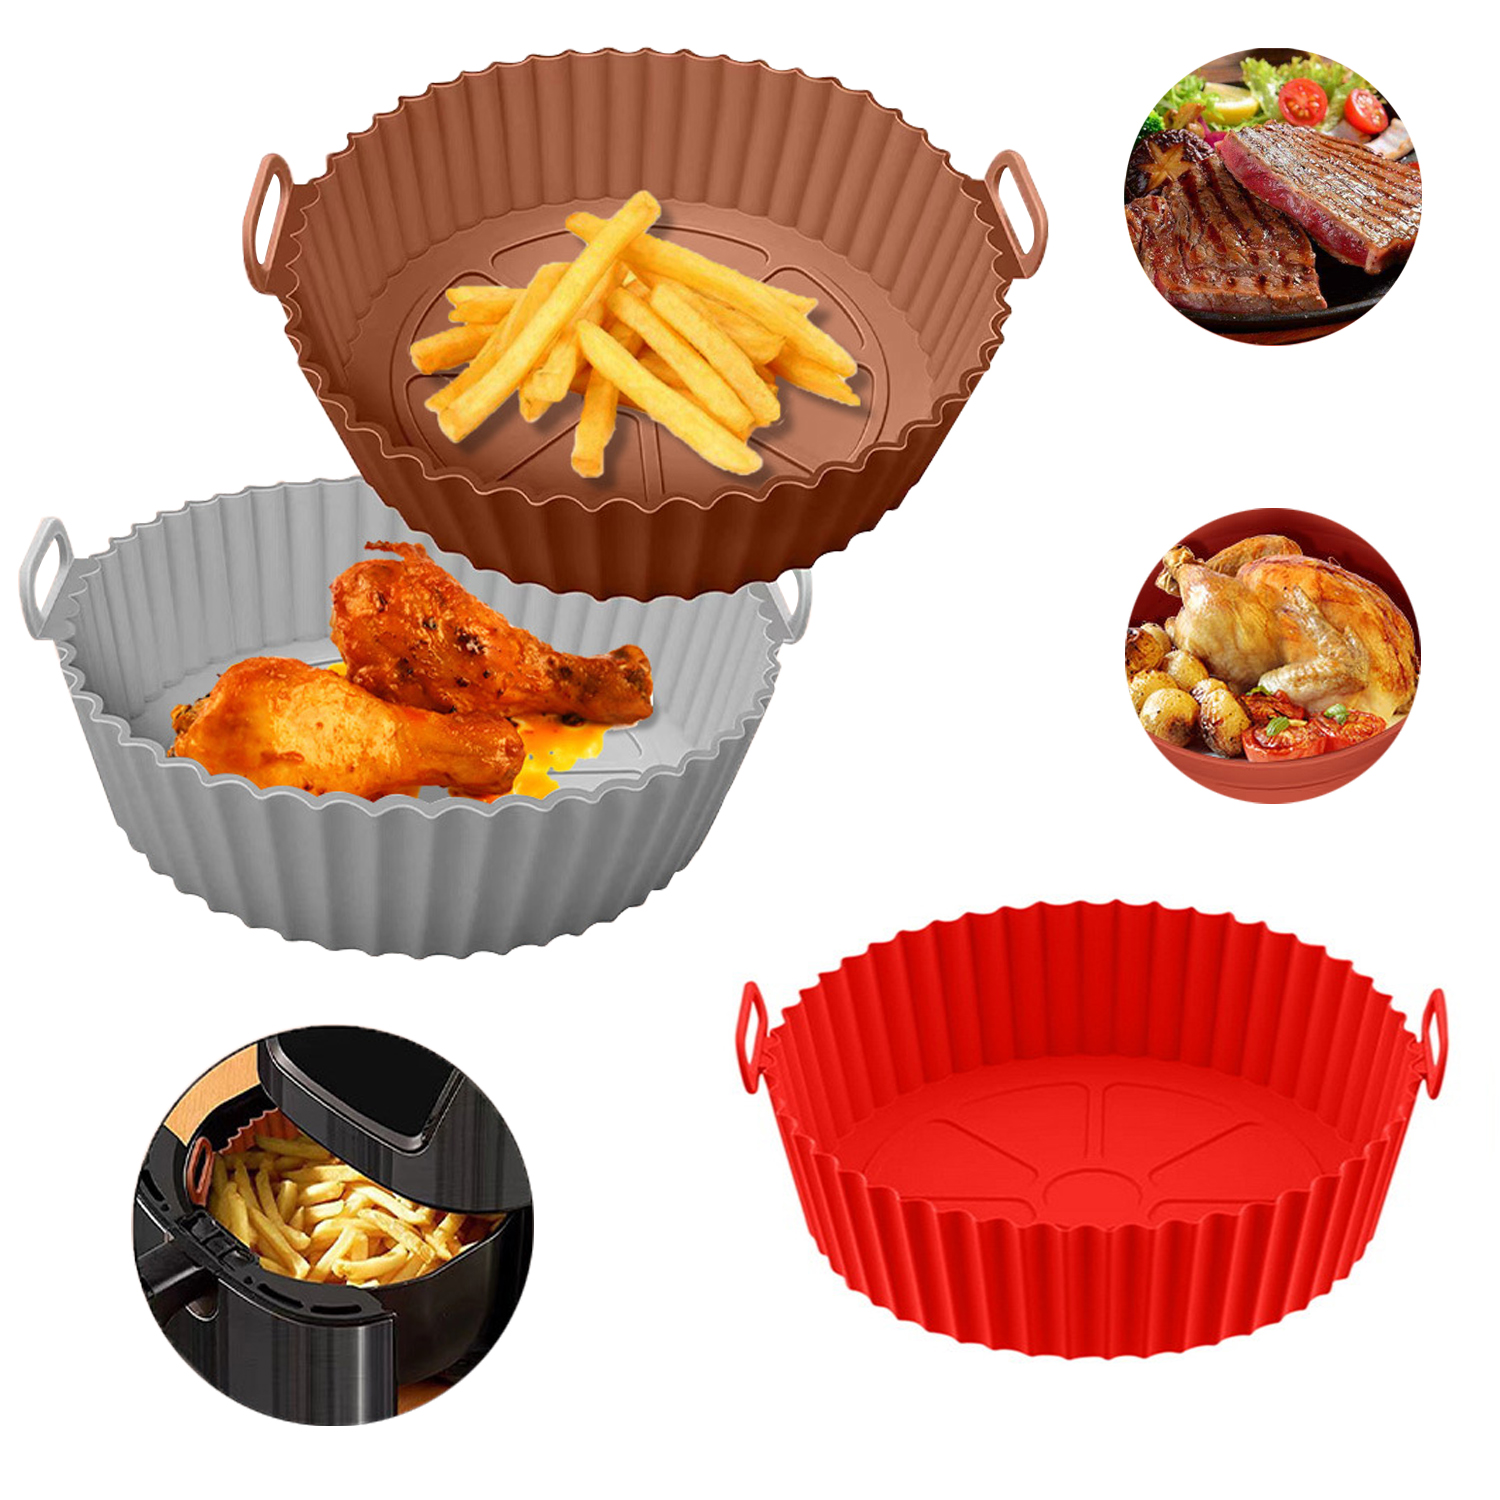 Air Frying Pan Silicone Basket Bowl Reusable Baking Pan Set of 5 Pieces, Pairs Silicone Oven Mitts, Silicone Pastry Brush for Oil Butter